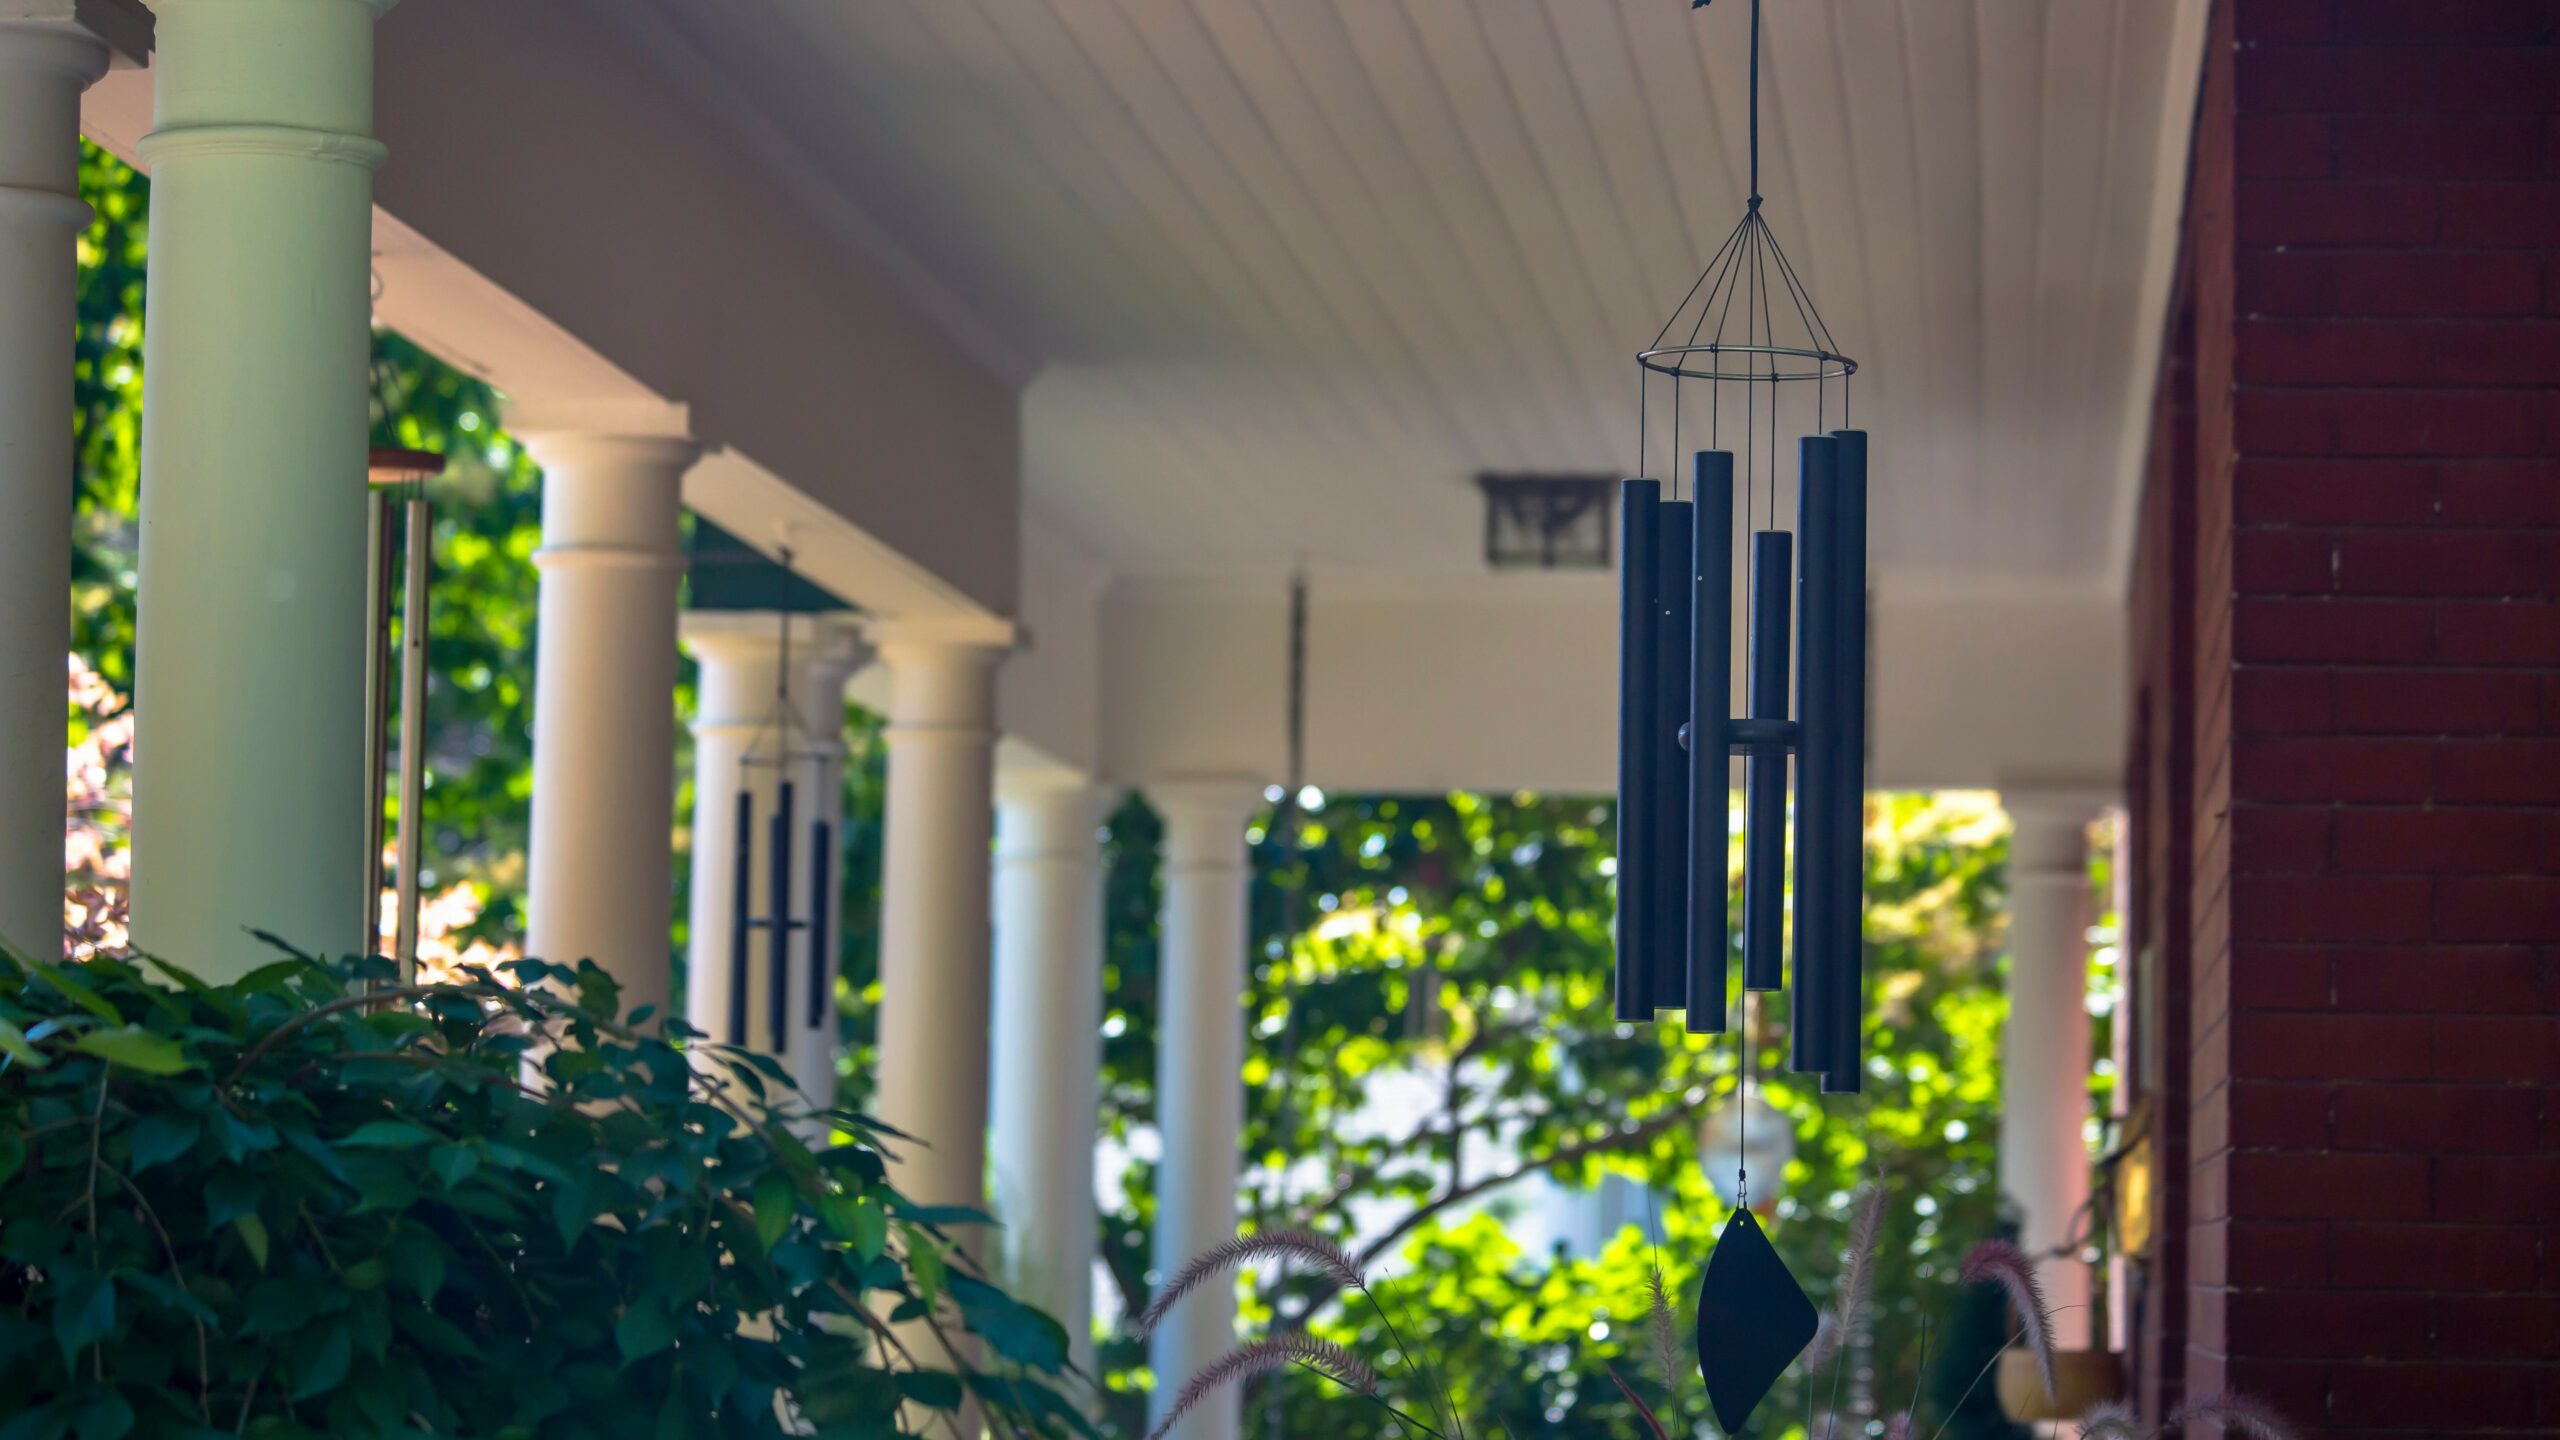 House with wind chimes